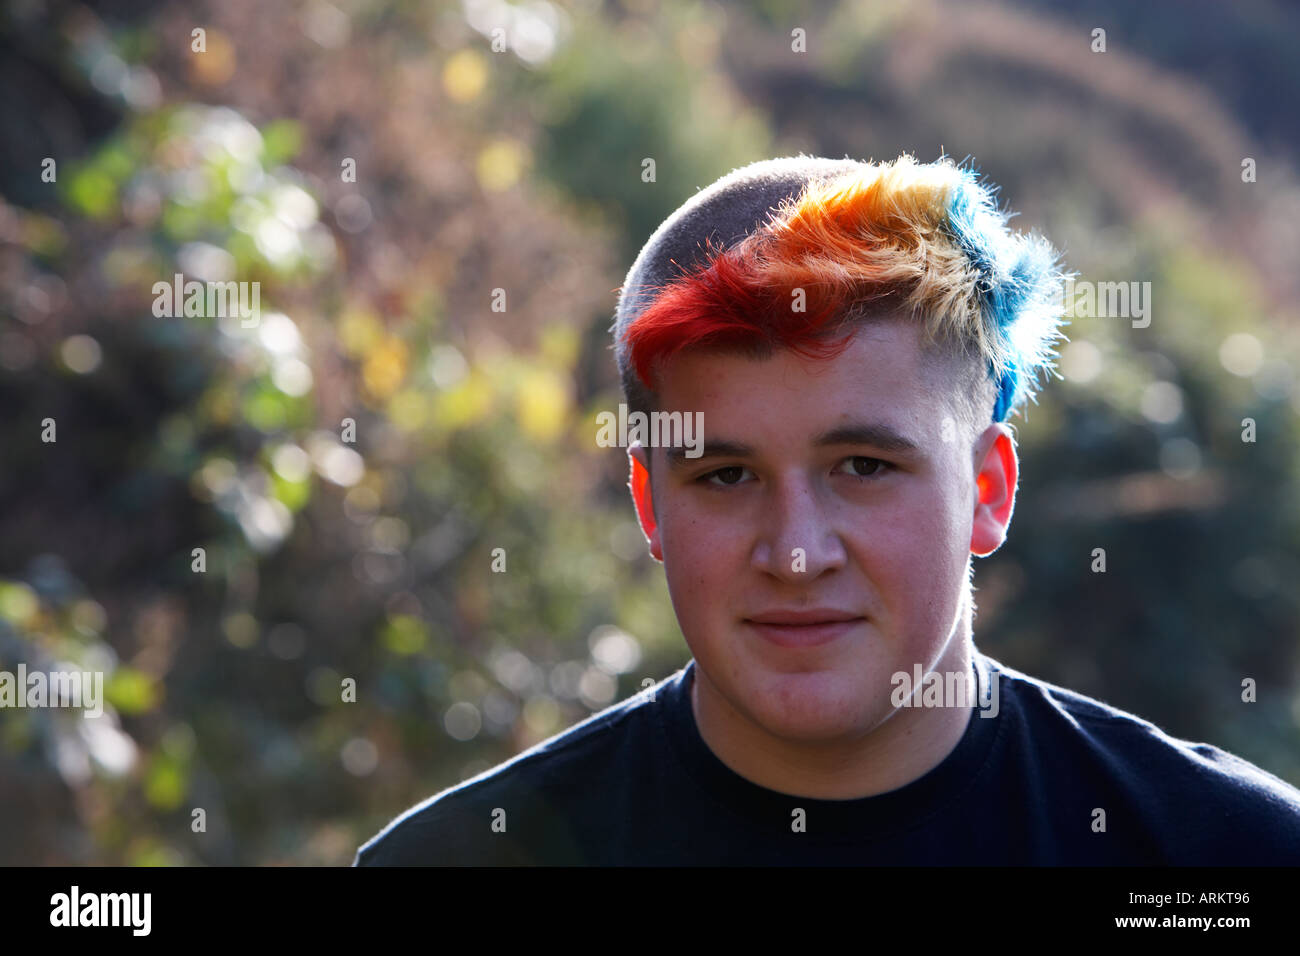 young man with colourful punk hairstyle Stock Photo